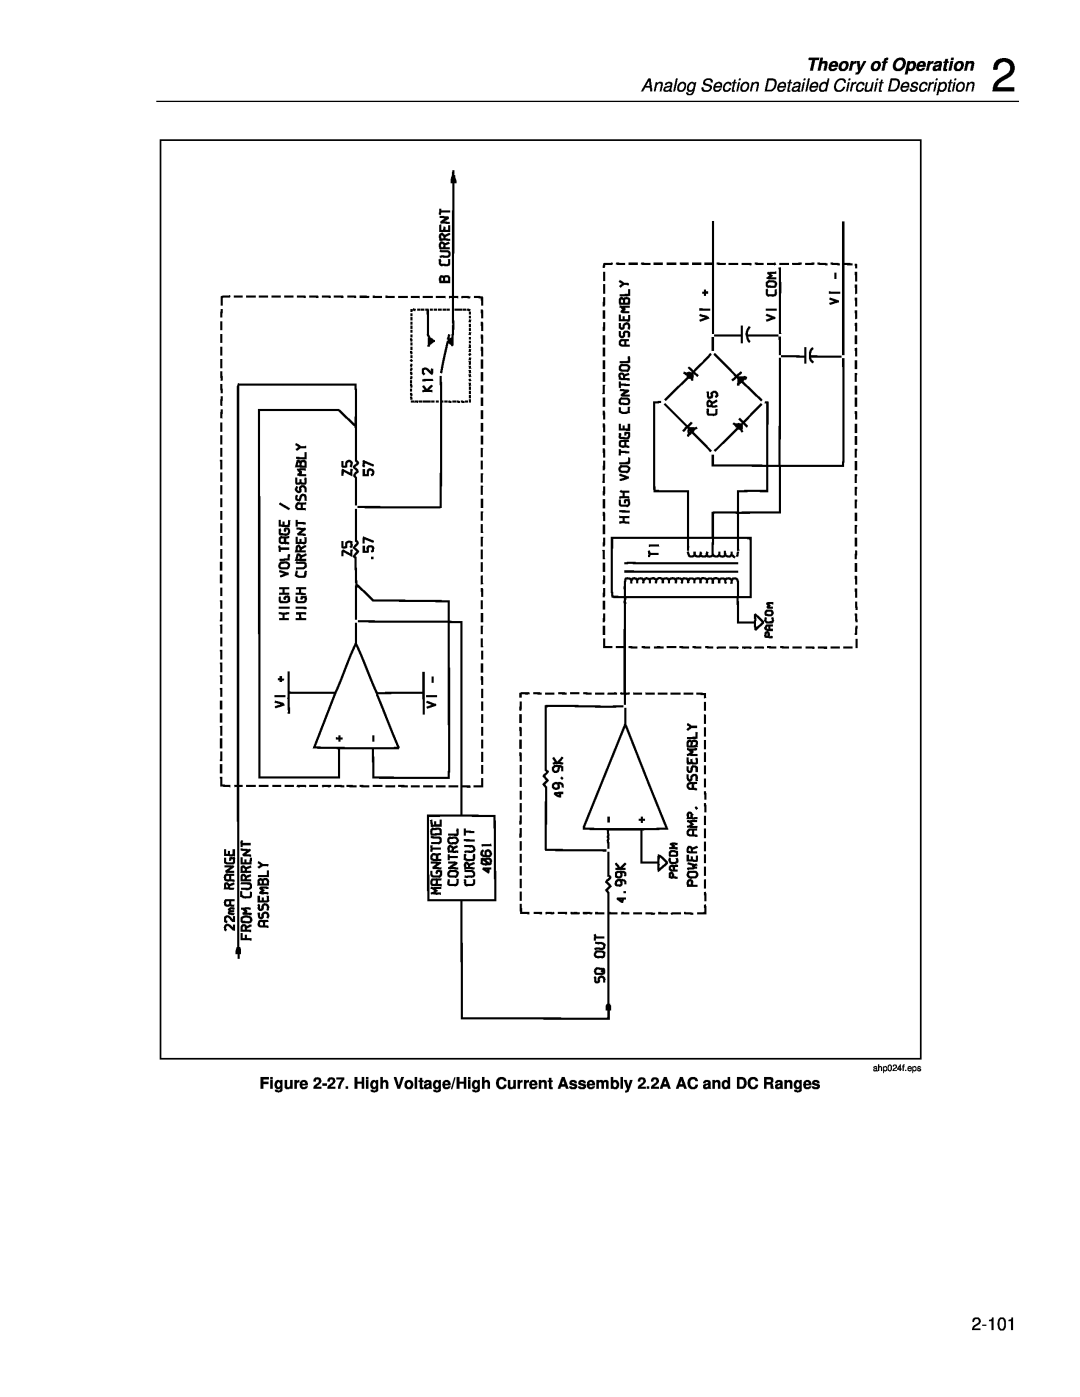 Fluke 5720A service manual Theory of Operation, Analog Section Detailed Circuit Description, ahp024f.eps 